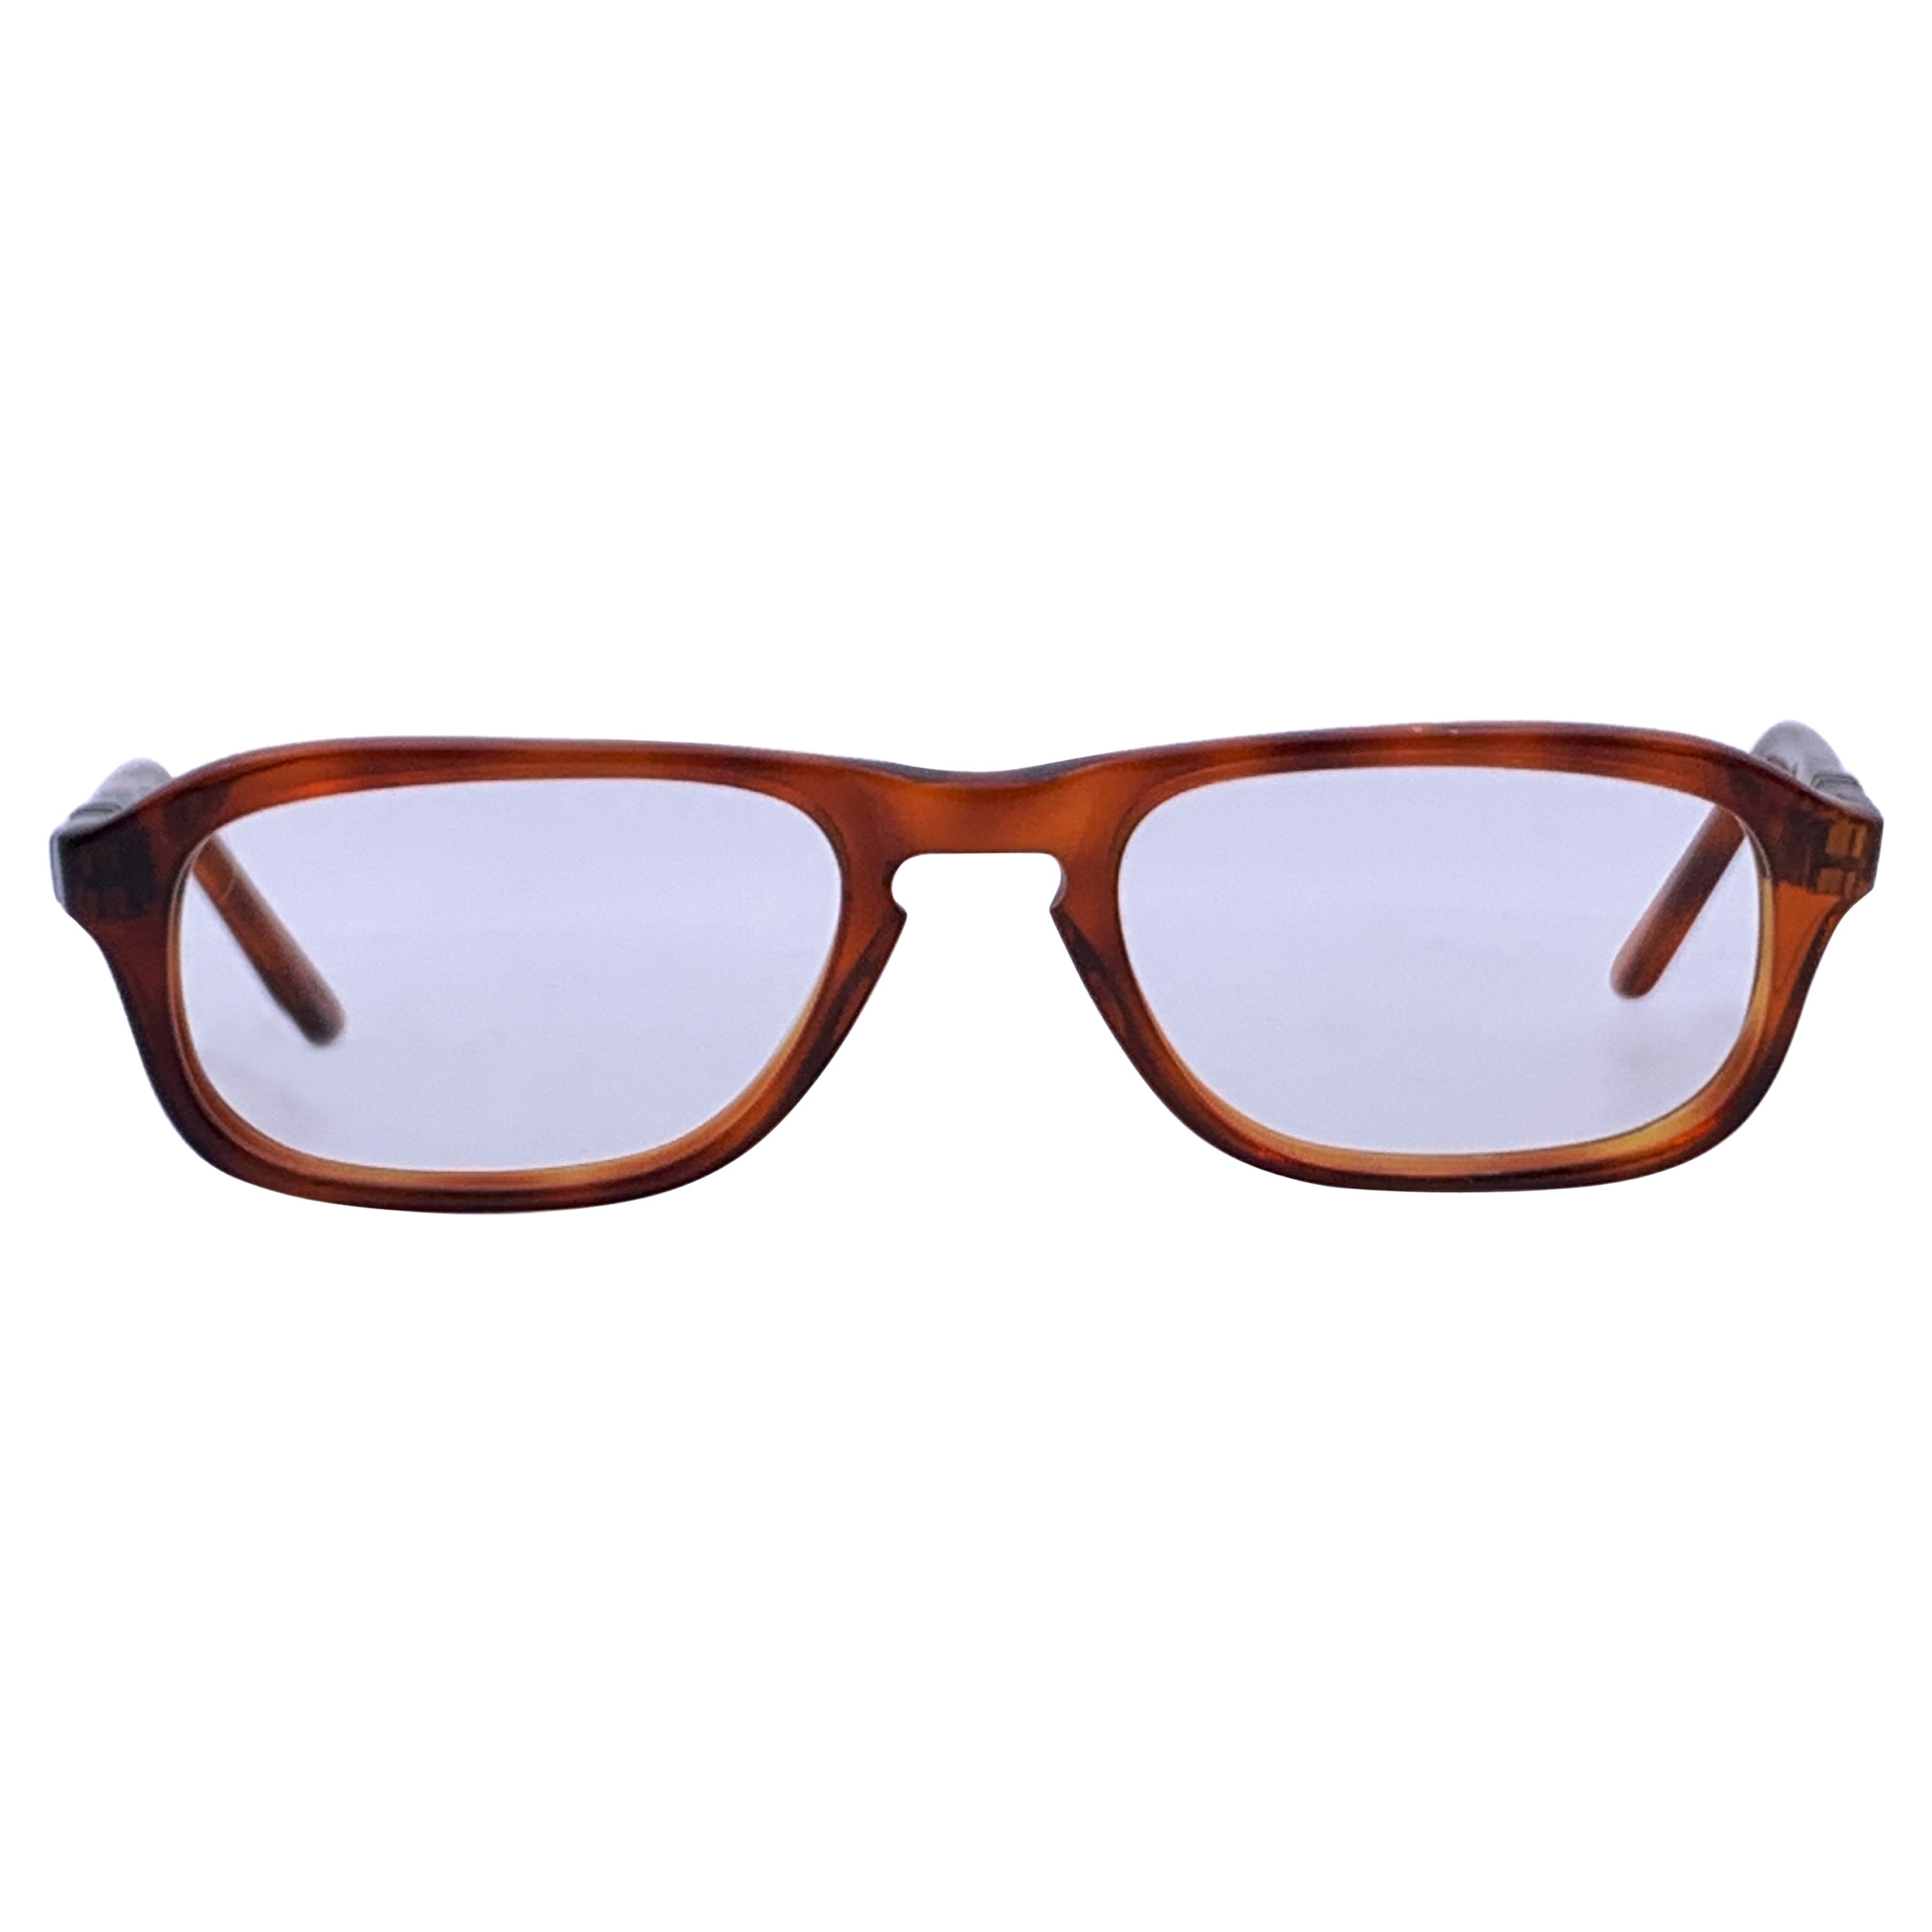 Persol Meflecto Ratti Vintage Brown Jolly 1 Eyeglasses 48-68 130 mm For Sale